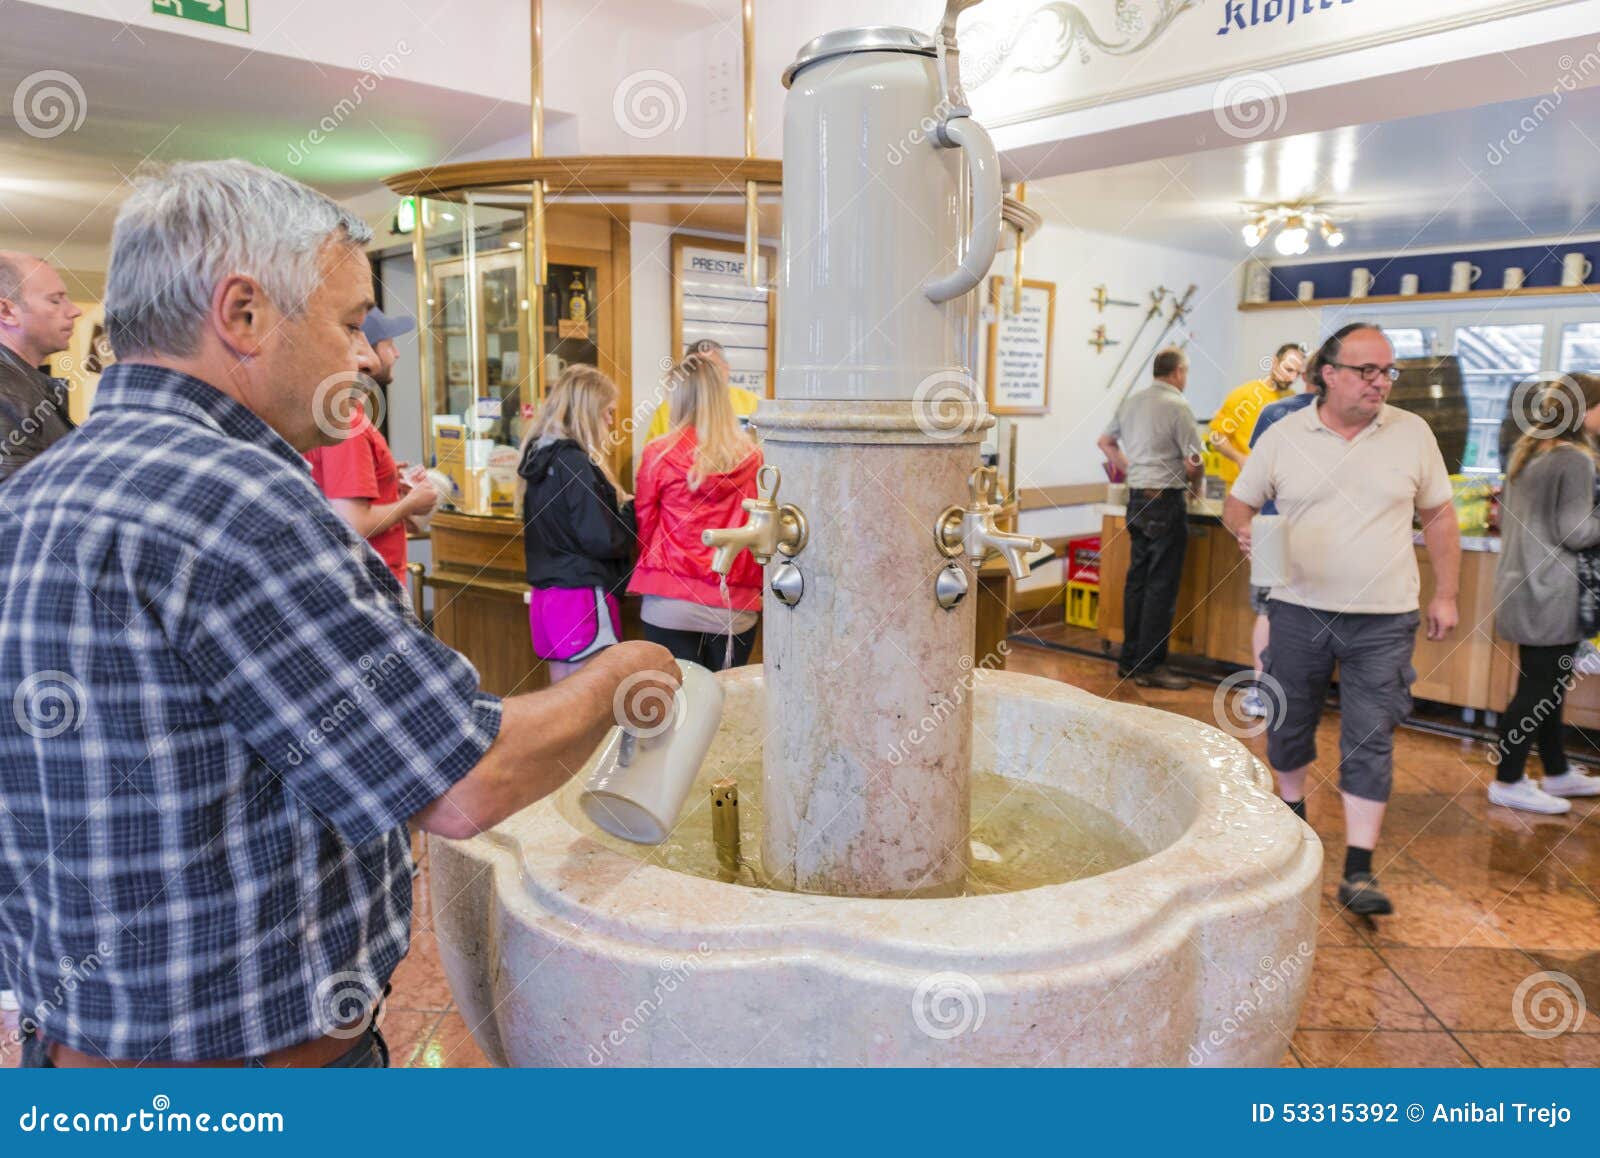 Augustiner Brewery At Mulln Salzburg Austria Editorial Photography Image Of Salzach Attraction